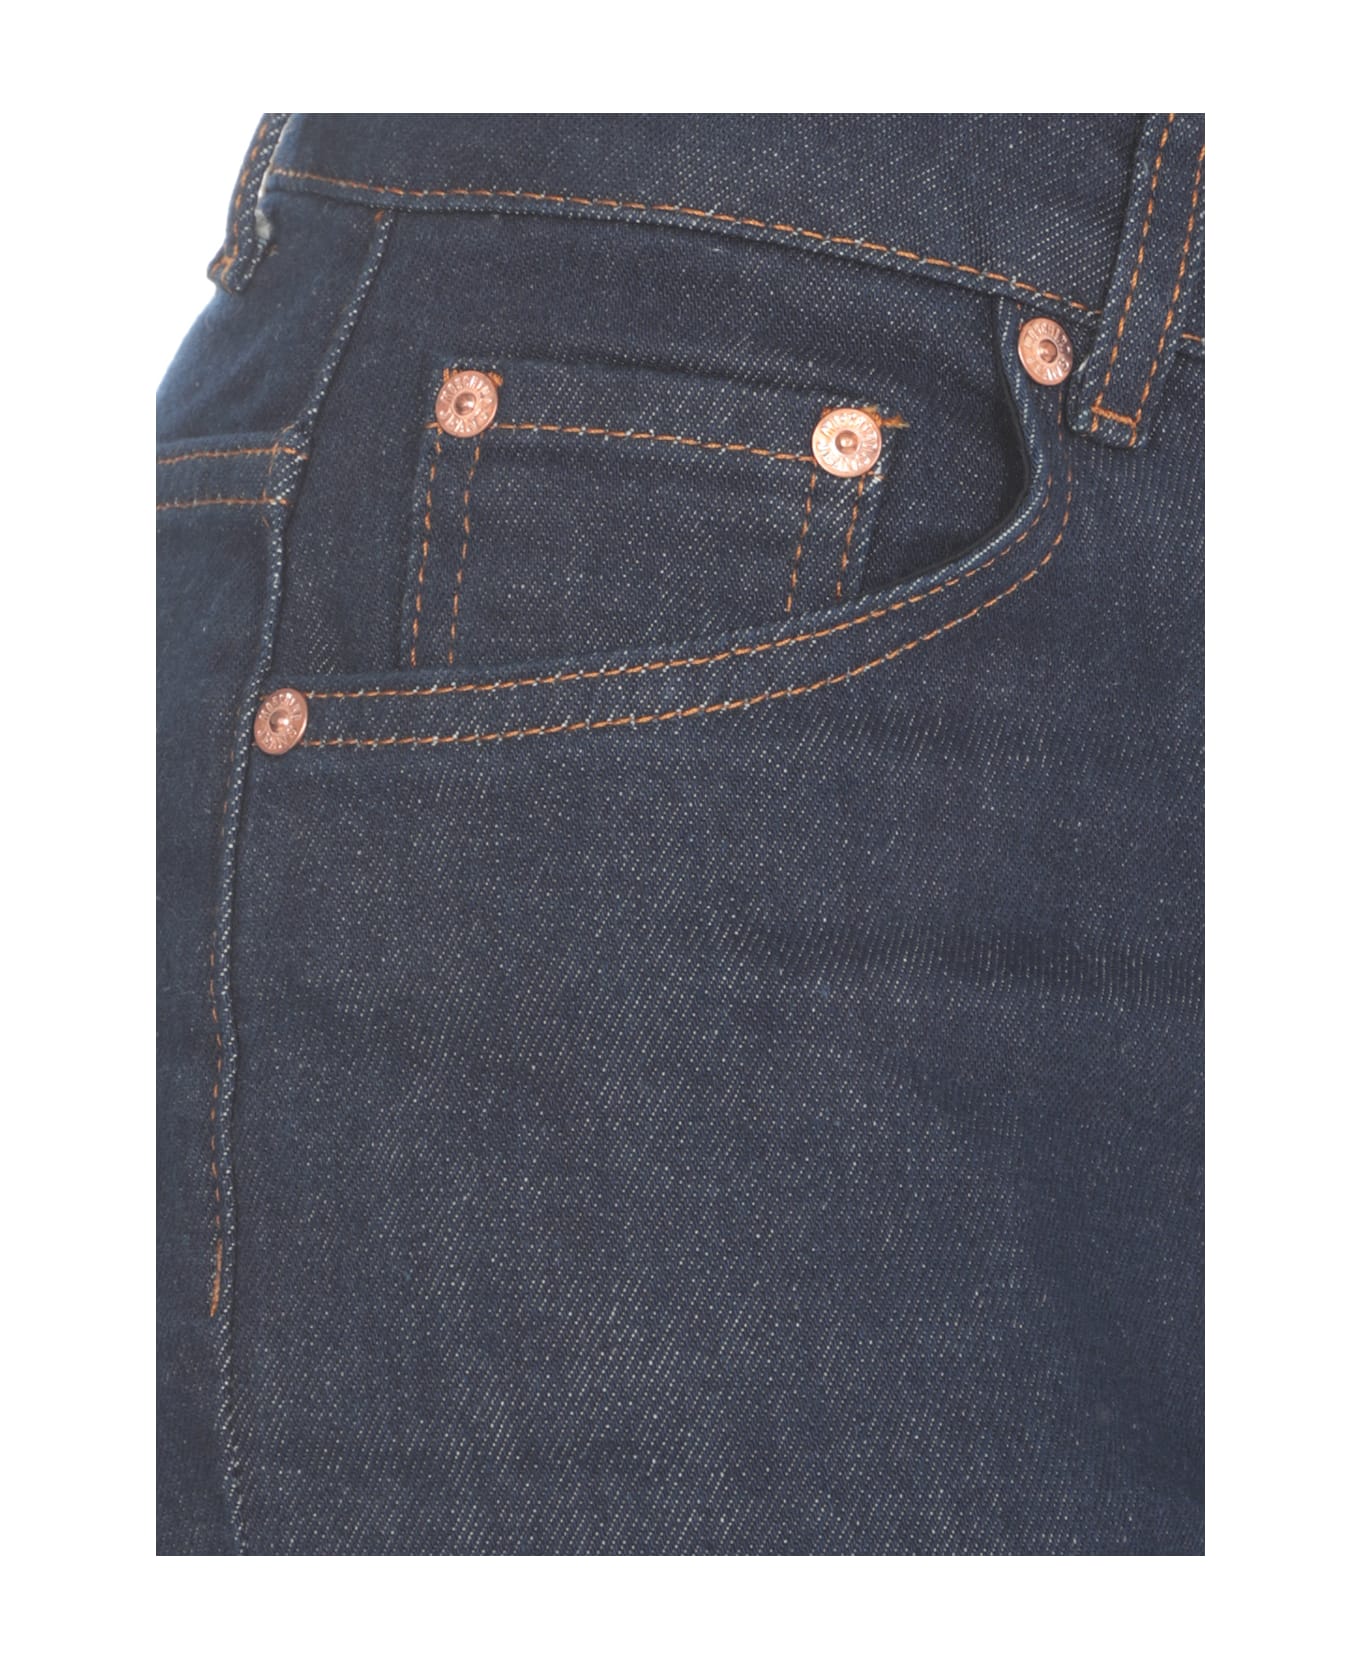 M05CH1N0 Jeans Cotton Jeans - Blue ボトムス